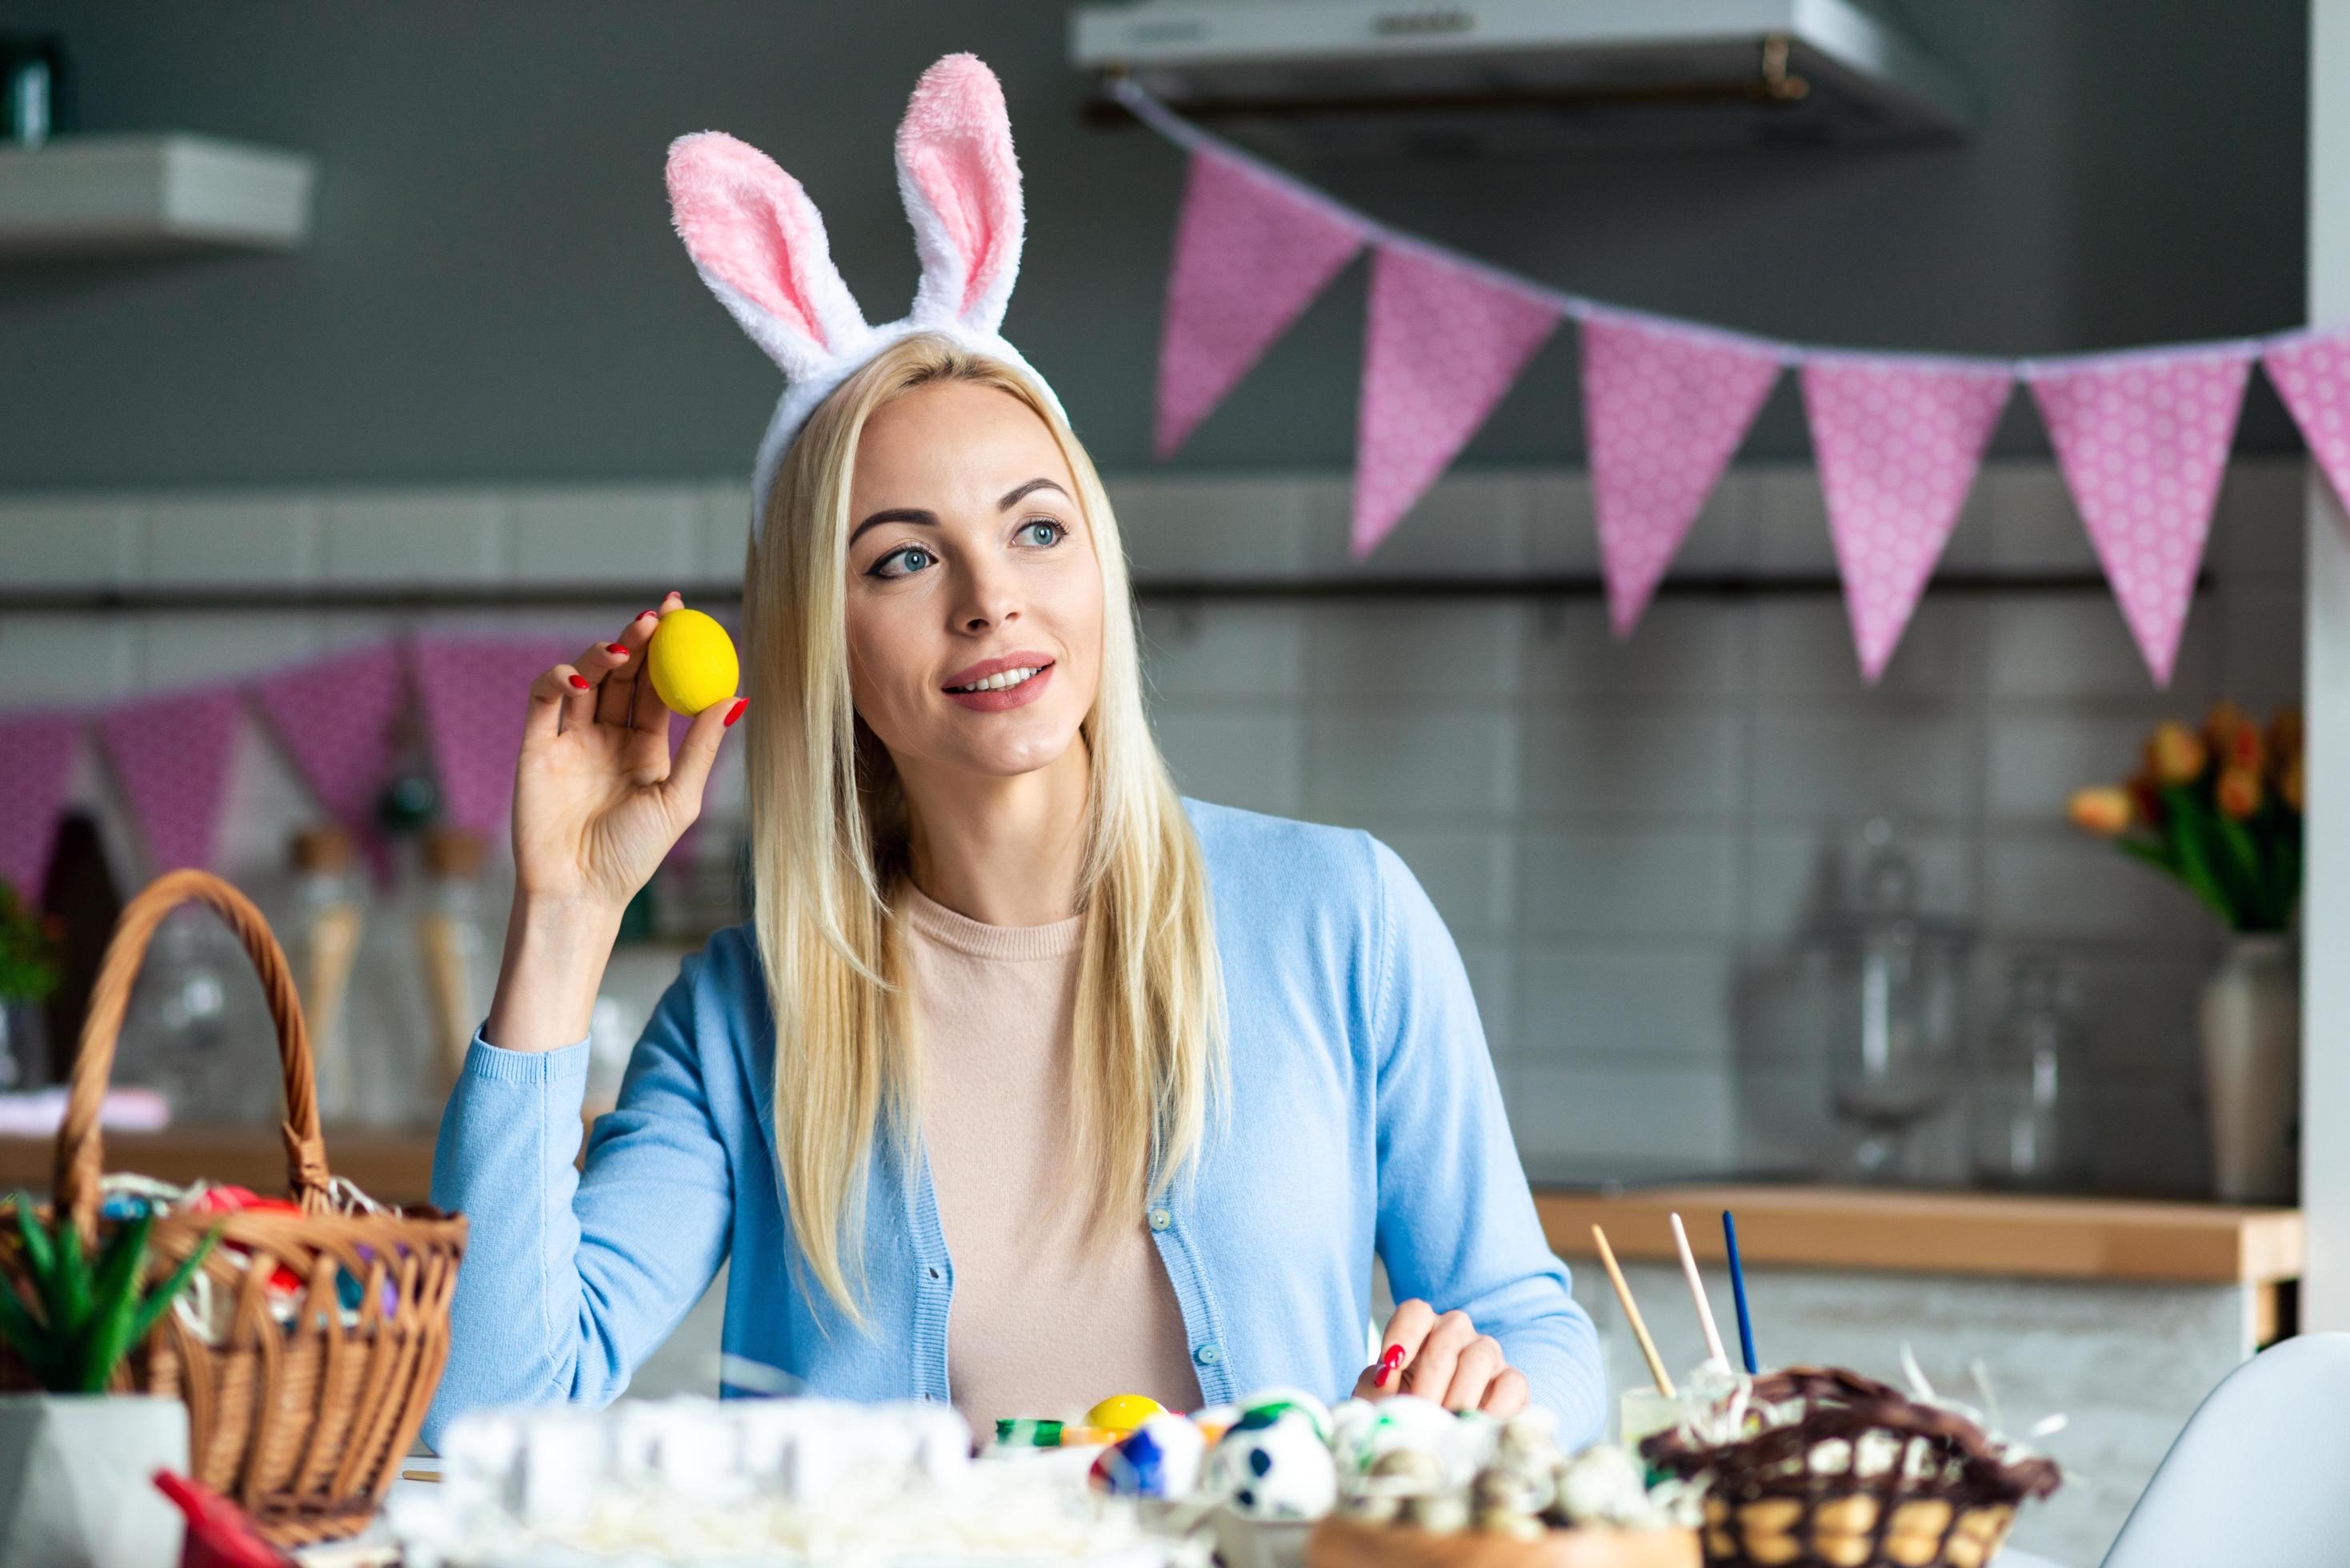 beautiful-blond-woman-holds-an-easter-egg-in-her-hand-and-looks-away-dreamily-free-photo.JPG